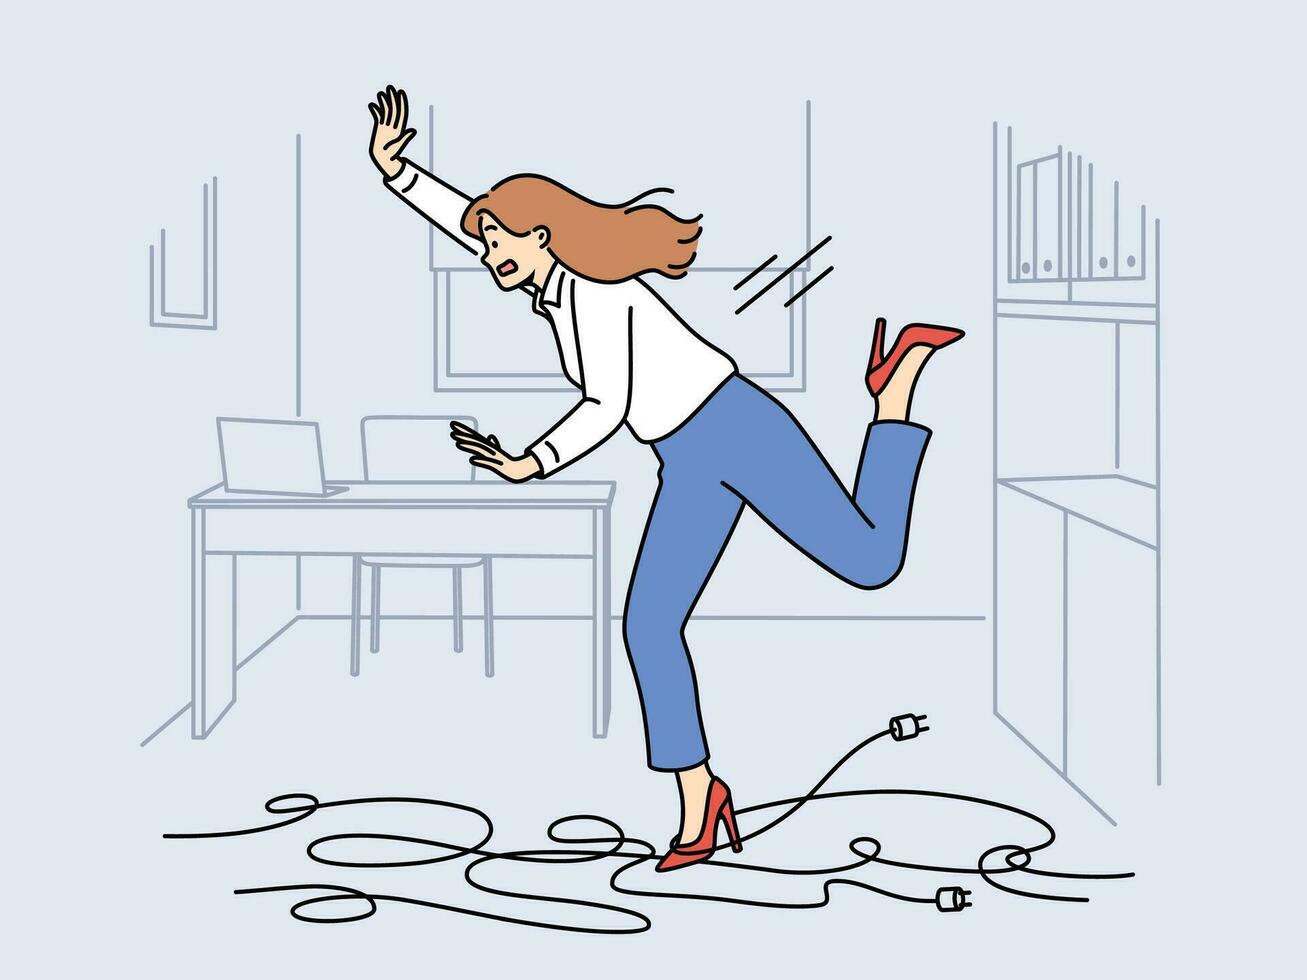 Businesswoman trips on wires and falls, risking injury due to clumsiness or mess in workplace vector